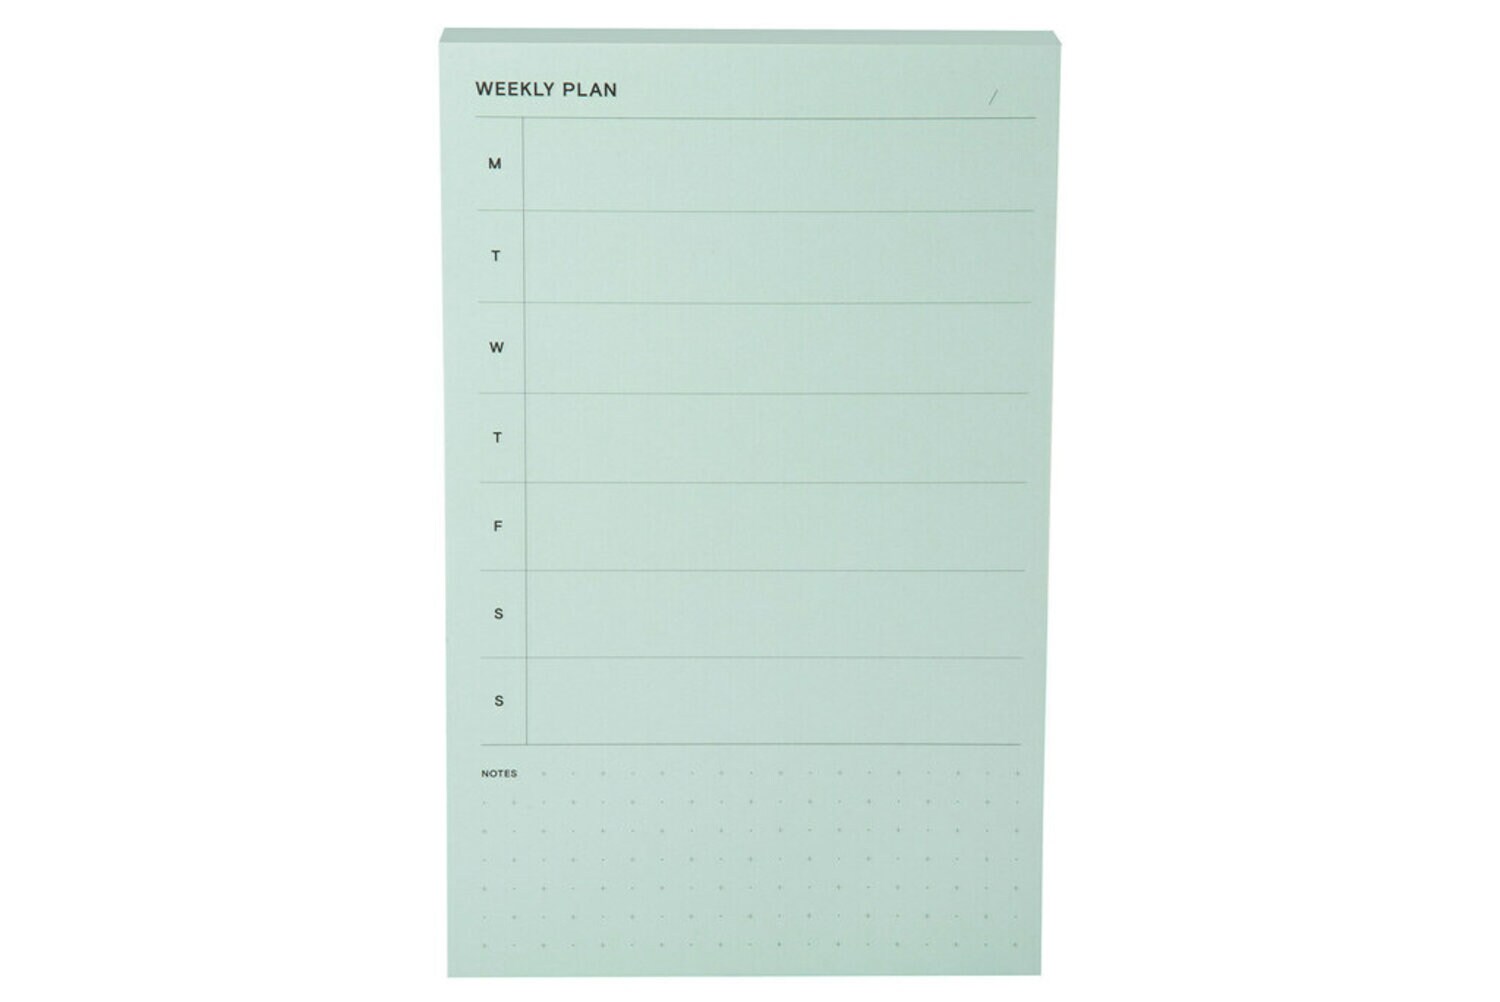 7100233965 - Post-it Printed Notes NTD-58-GRN, 4.9 in x 7.7 in (124 mm x 195 mm)